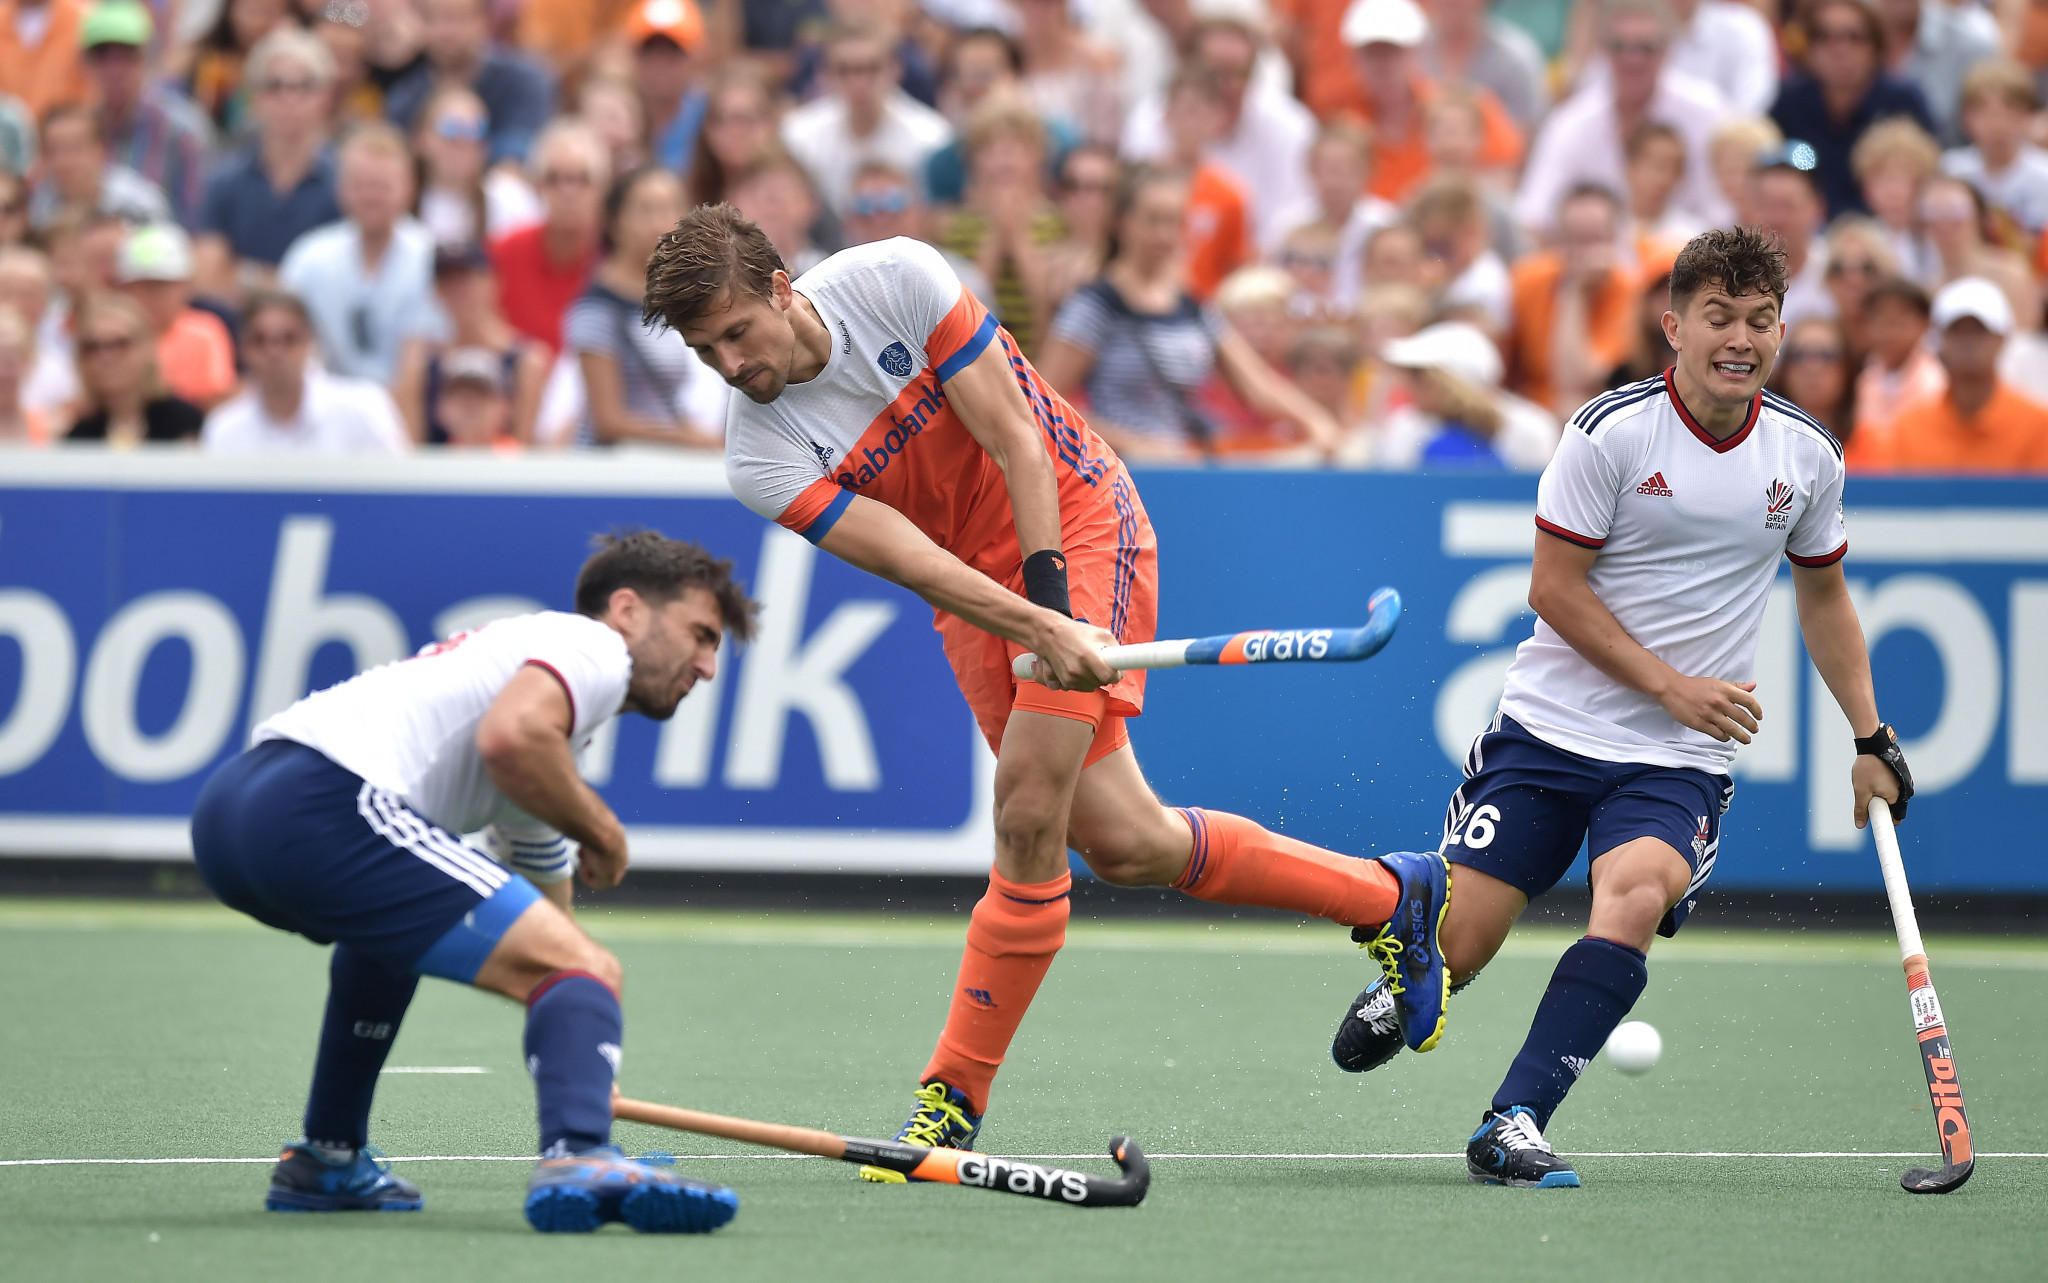 Dutch men win second shoot-out in two days in FIH Pro League 